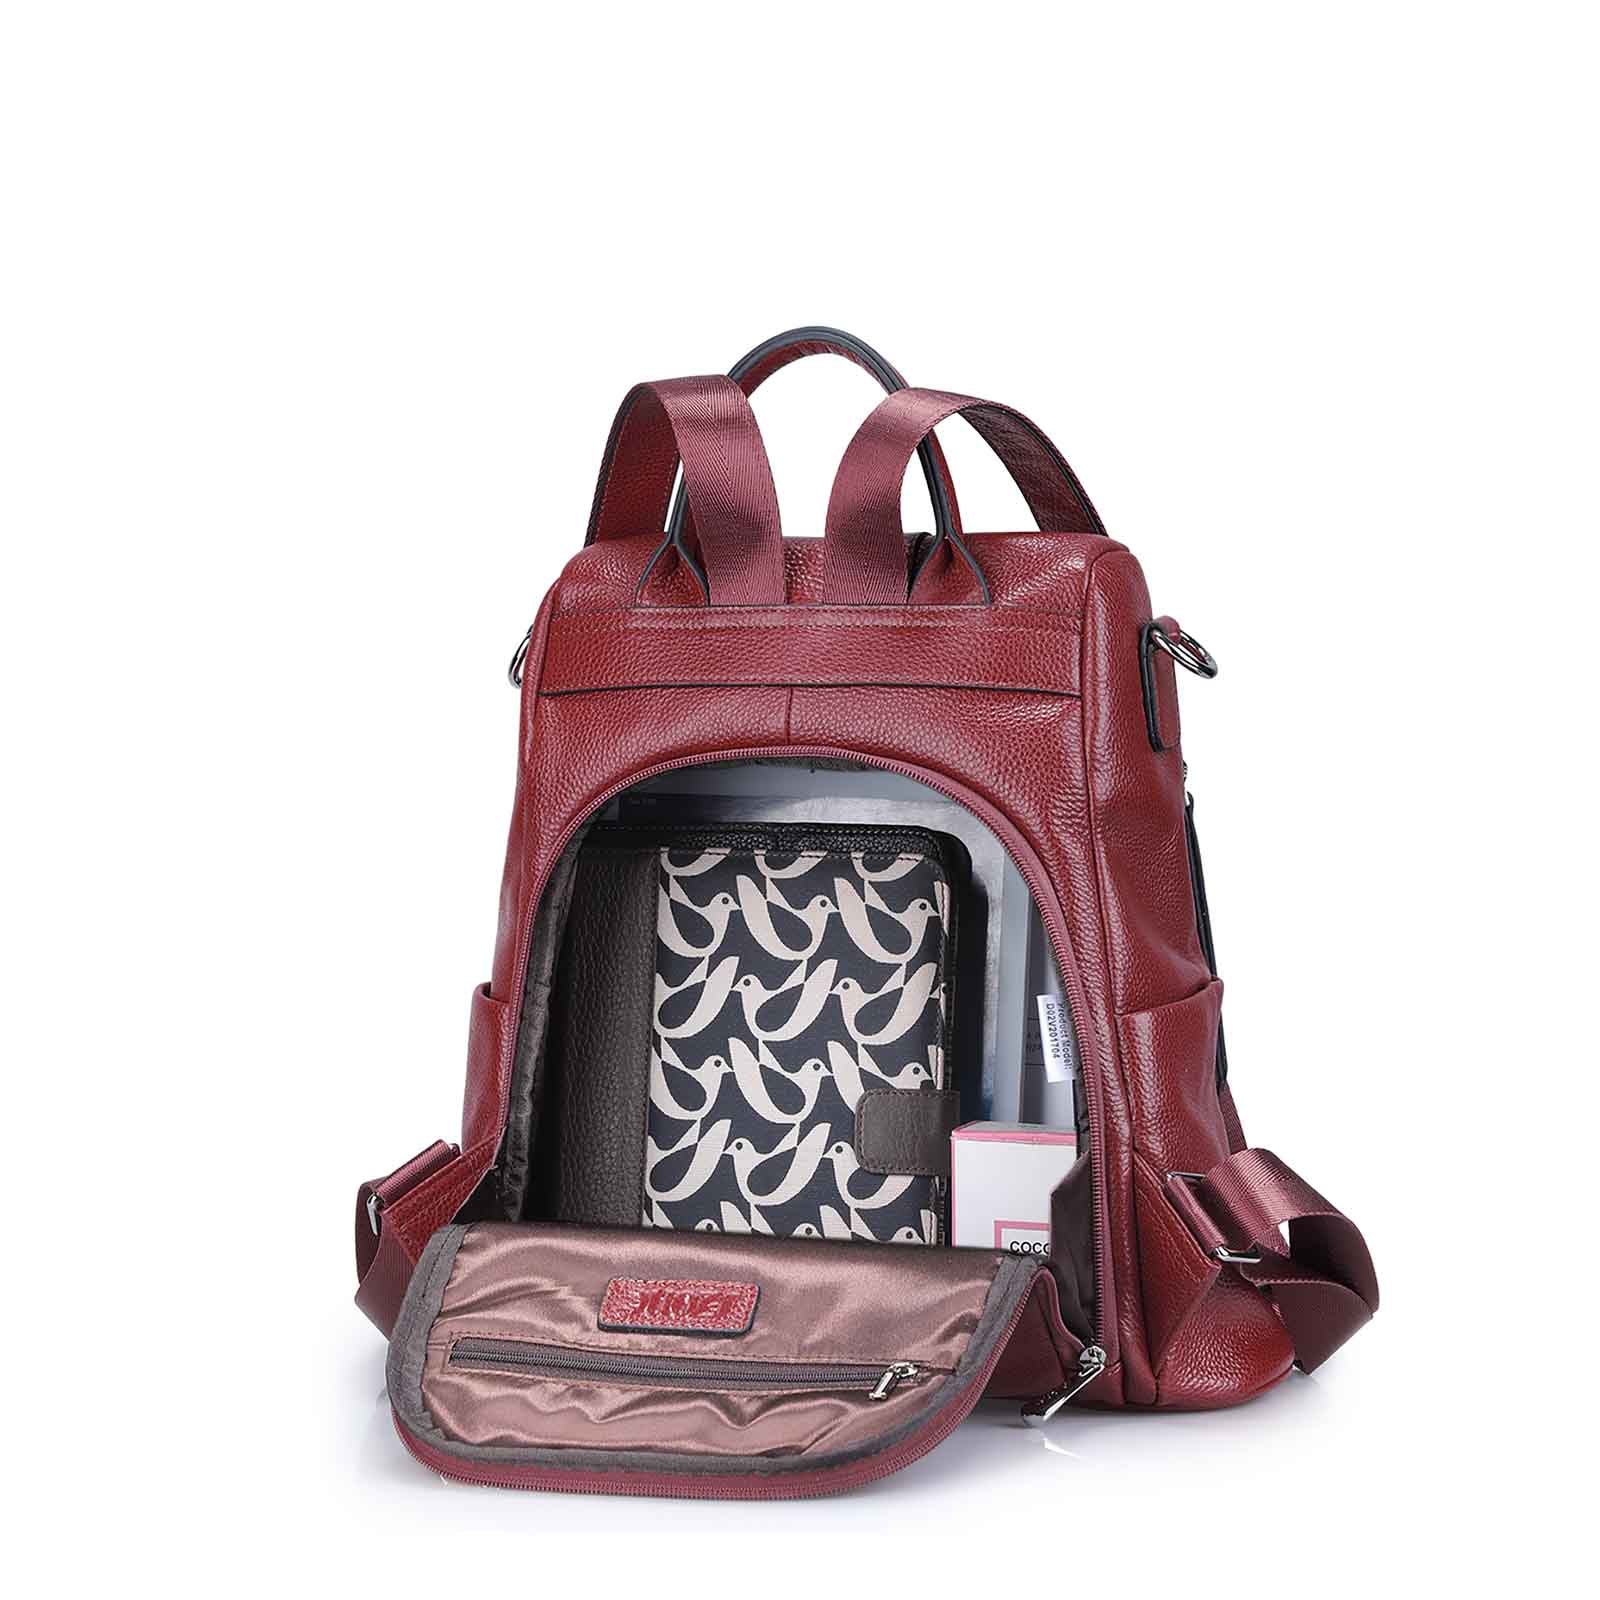 Small Backpack Anti Theft Leather, Sparkle Leather Backpack